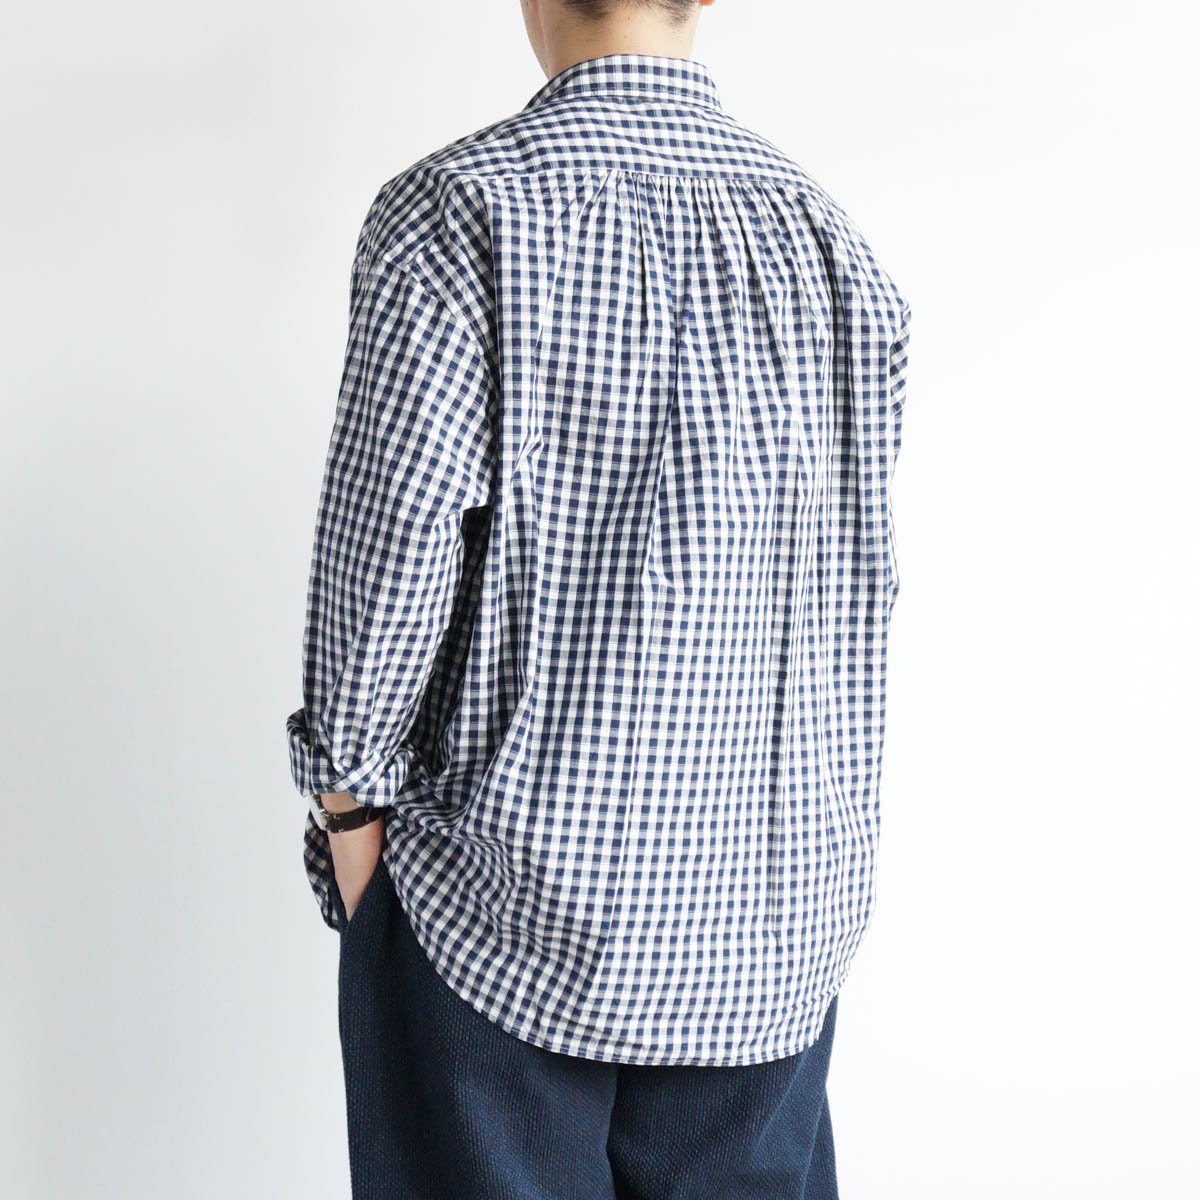 ROLL UP GINGHAM CHECK SHIRT - 香川県高松市のセレクトショップ IHATOVE（イーハトーブ）  A.PRESSE,NEPENTHES,NICENESS,PORTER CLASSIC,WIRROWの通販